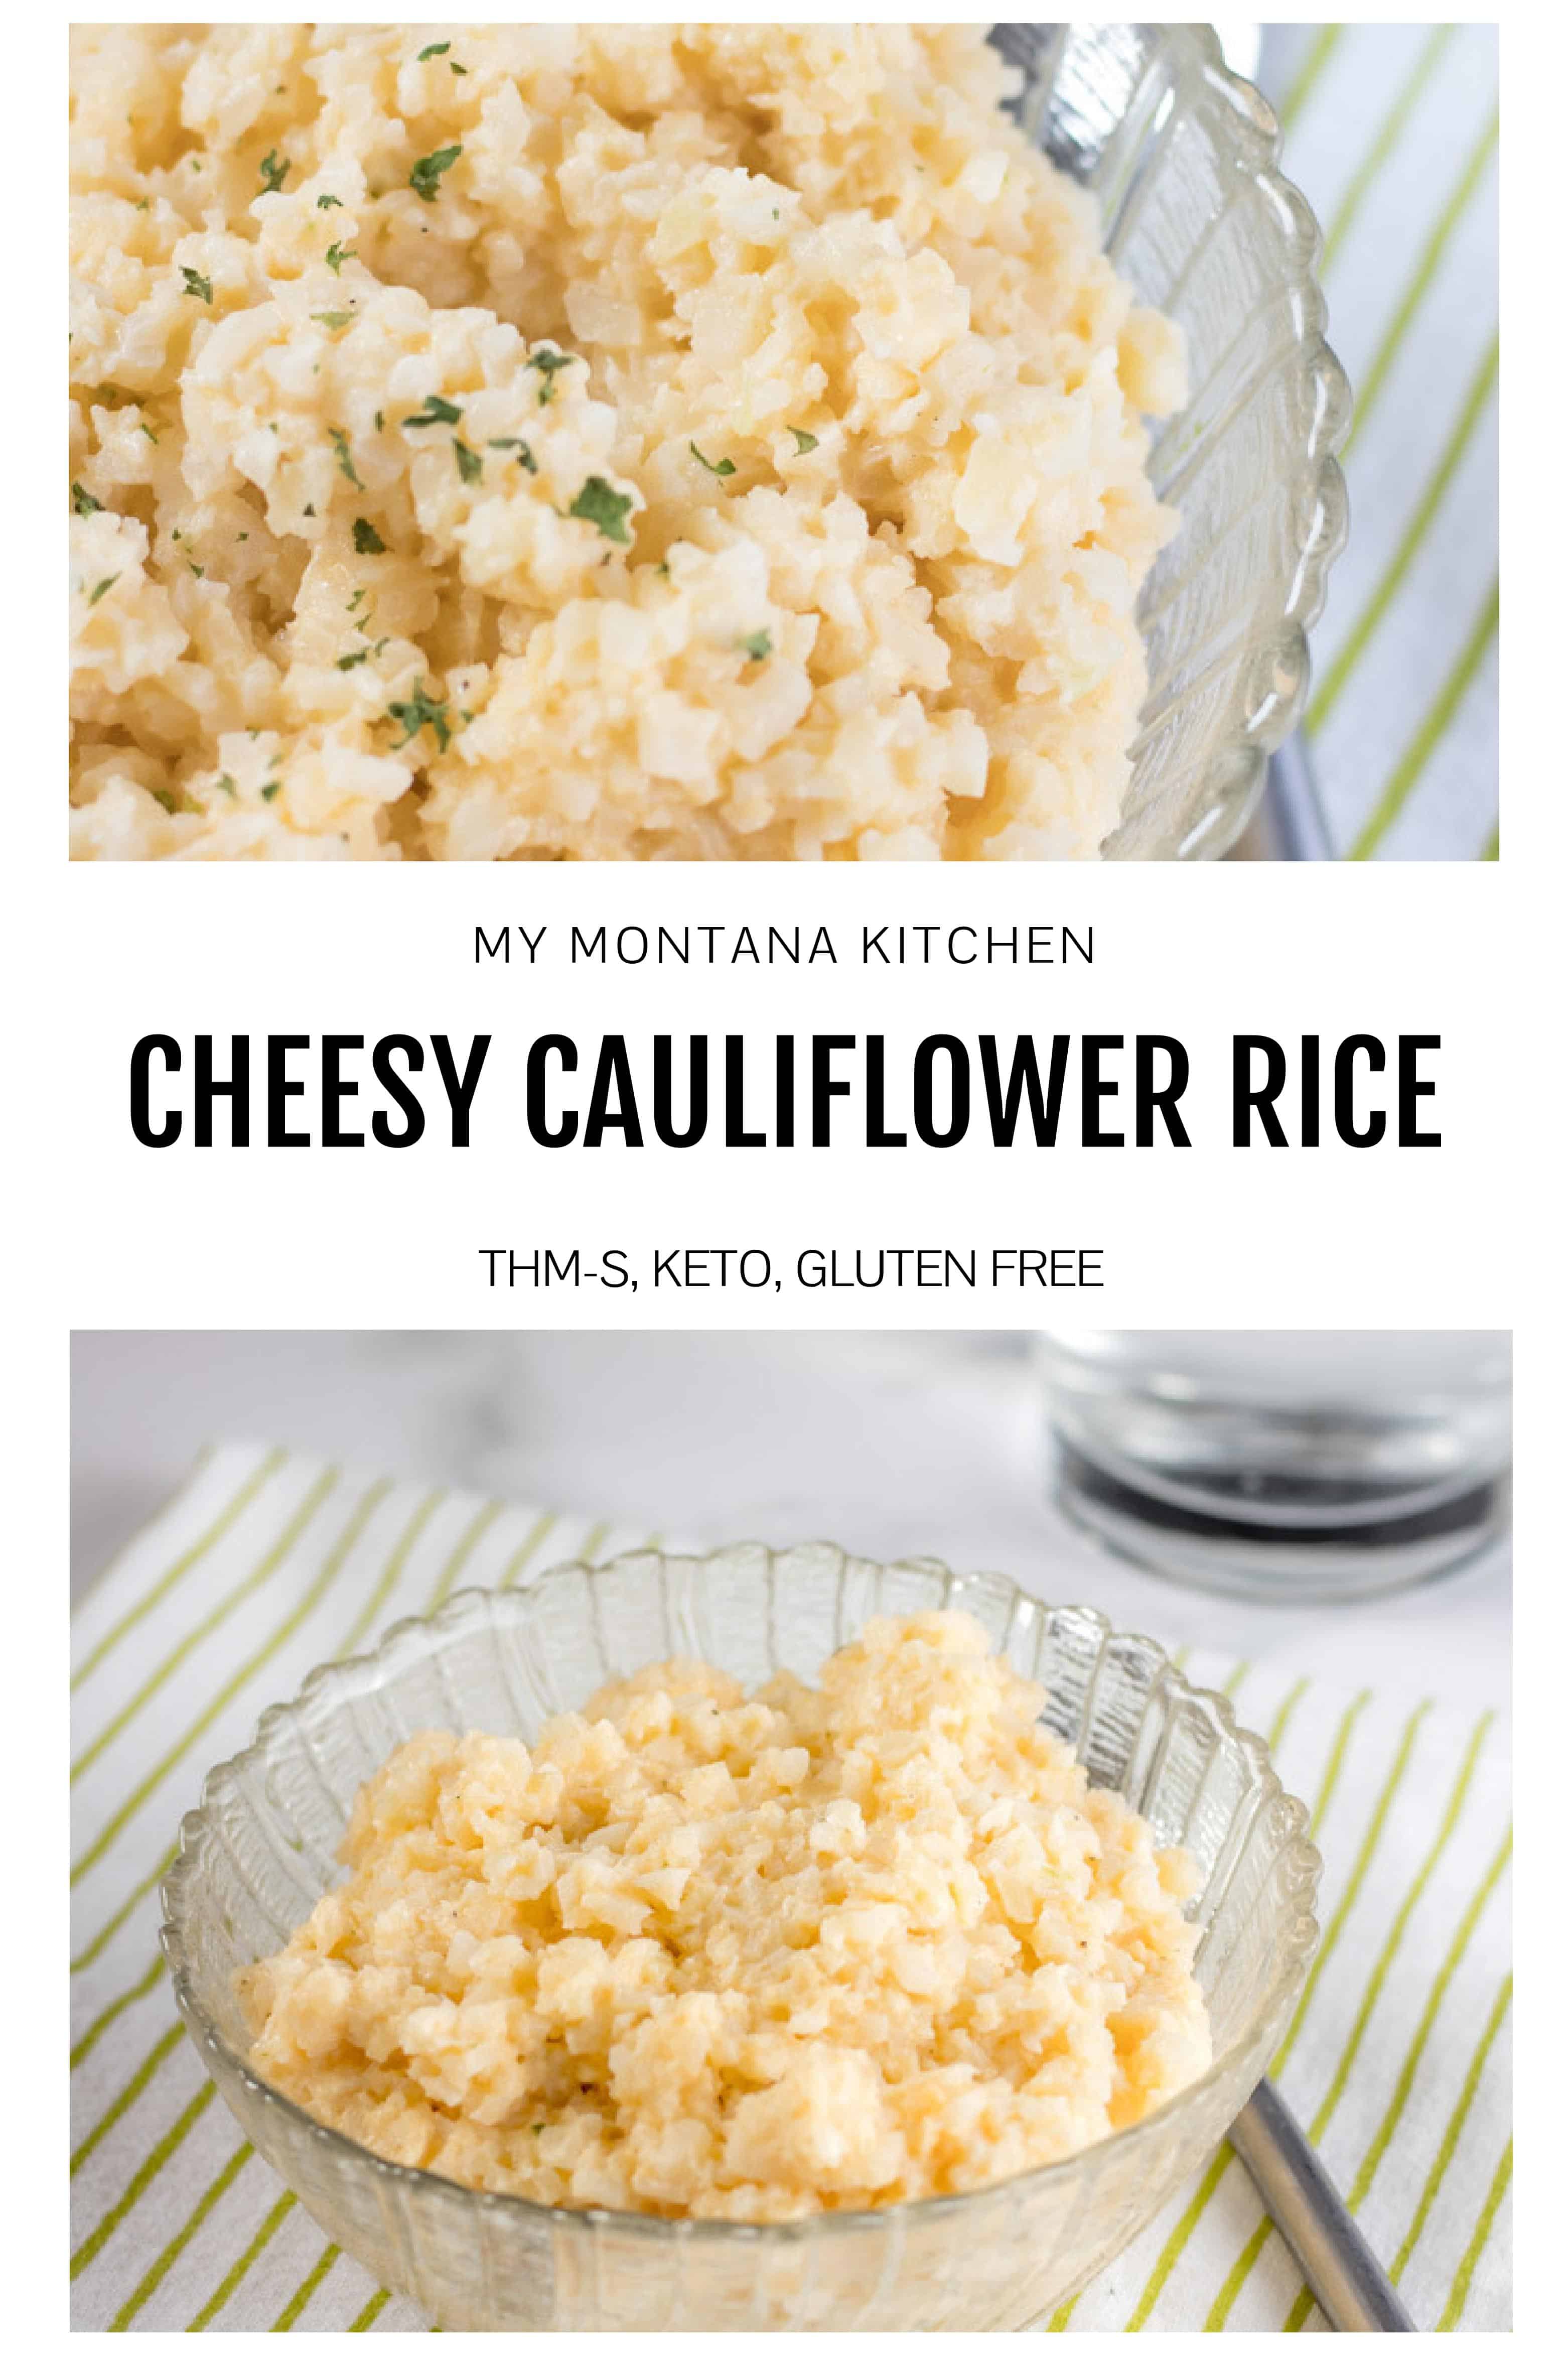 Easy cheesy cauliflower rice is the perfect keto side dish, but it can also make for a fabulous one-bowl low carb dinner. This cauliflower rice recipe is creamy, rich, low carb comfort food at its finest! #cauliflowerrice #cauliricerecipe